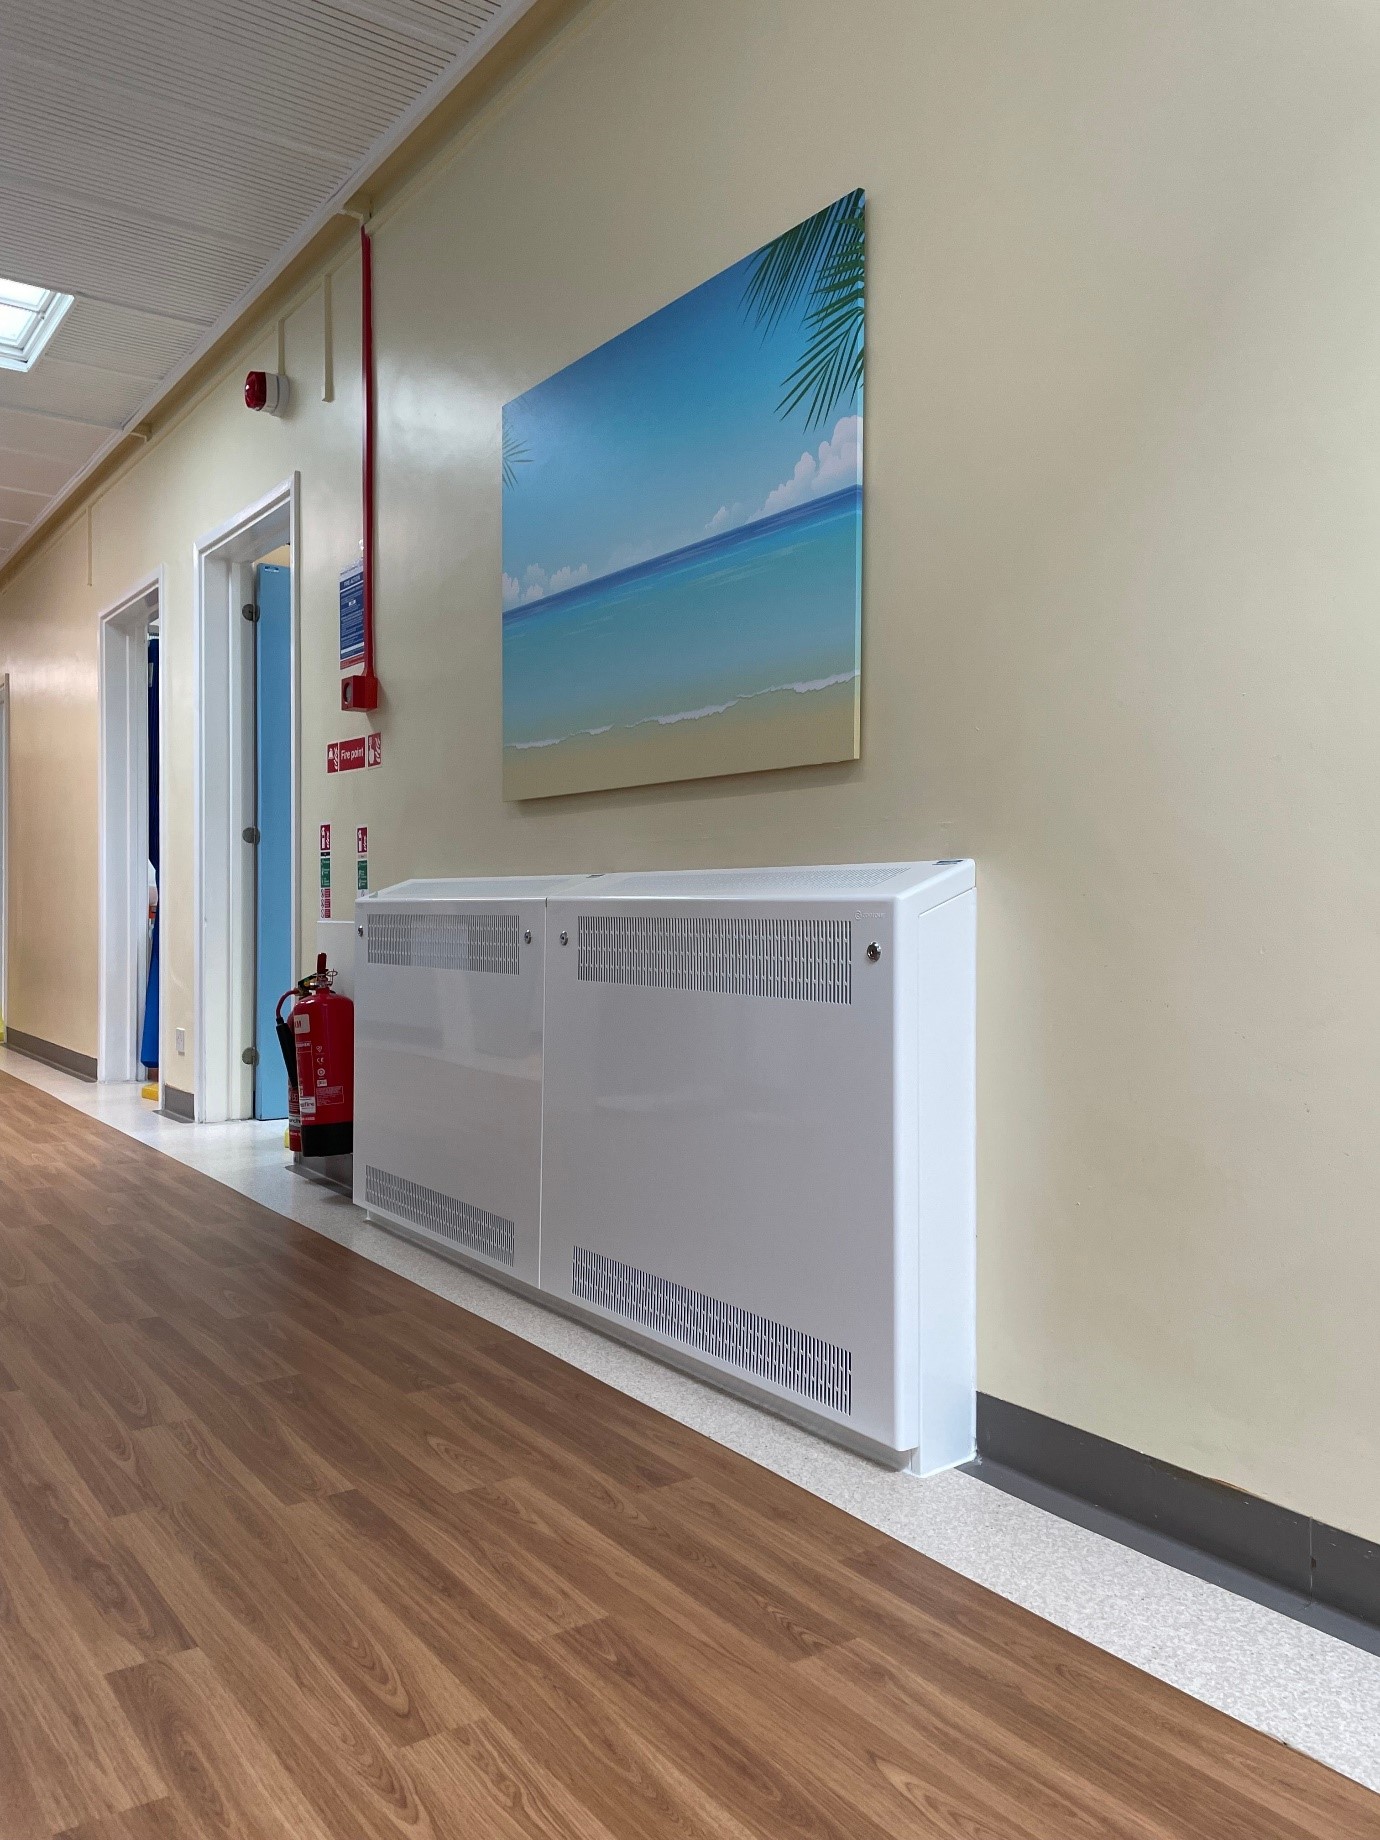 Over 800 LST Radiator Covers For 3 Hospitals